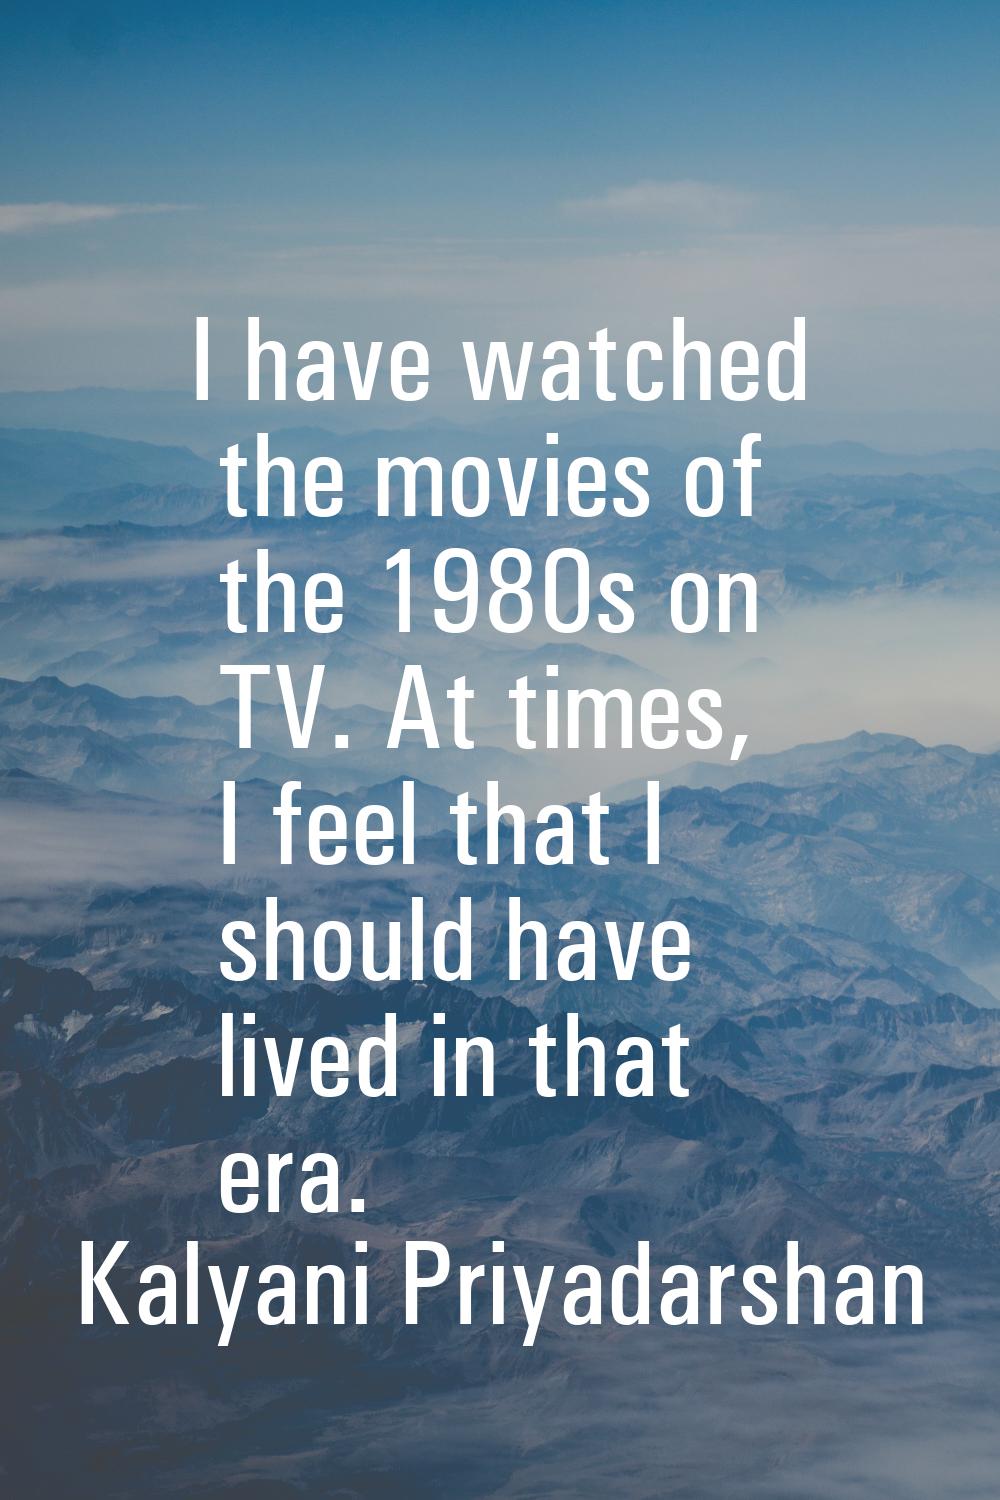 I have watched the movies of the 1980s on TV. At times, I feel that I should have lived in that era